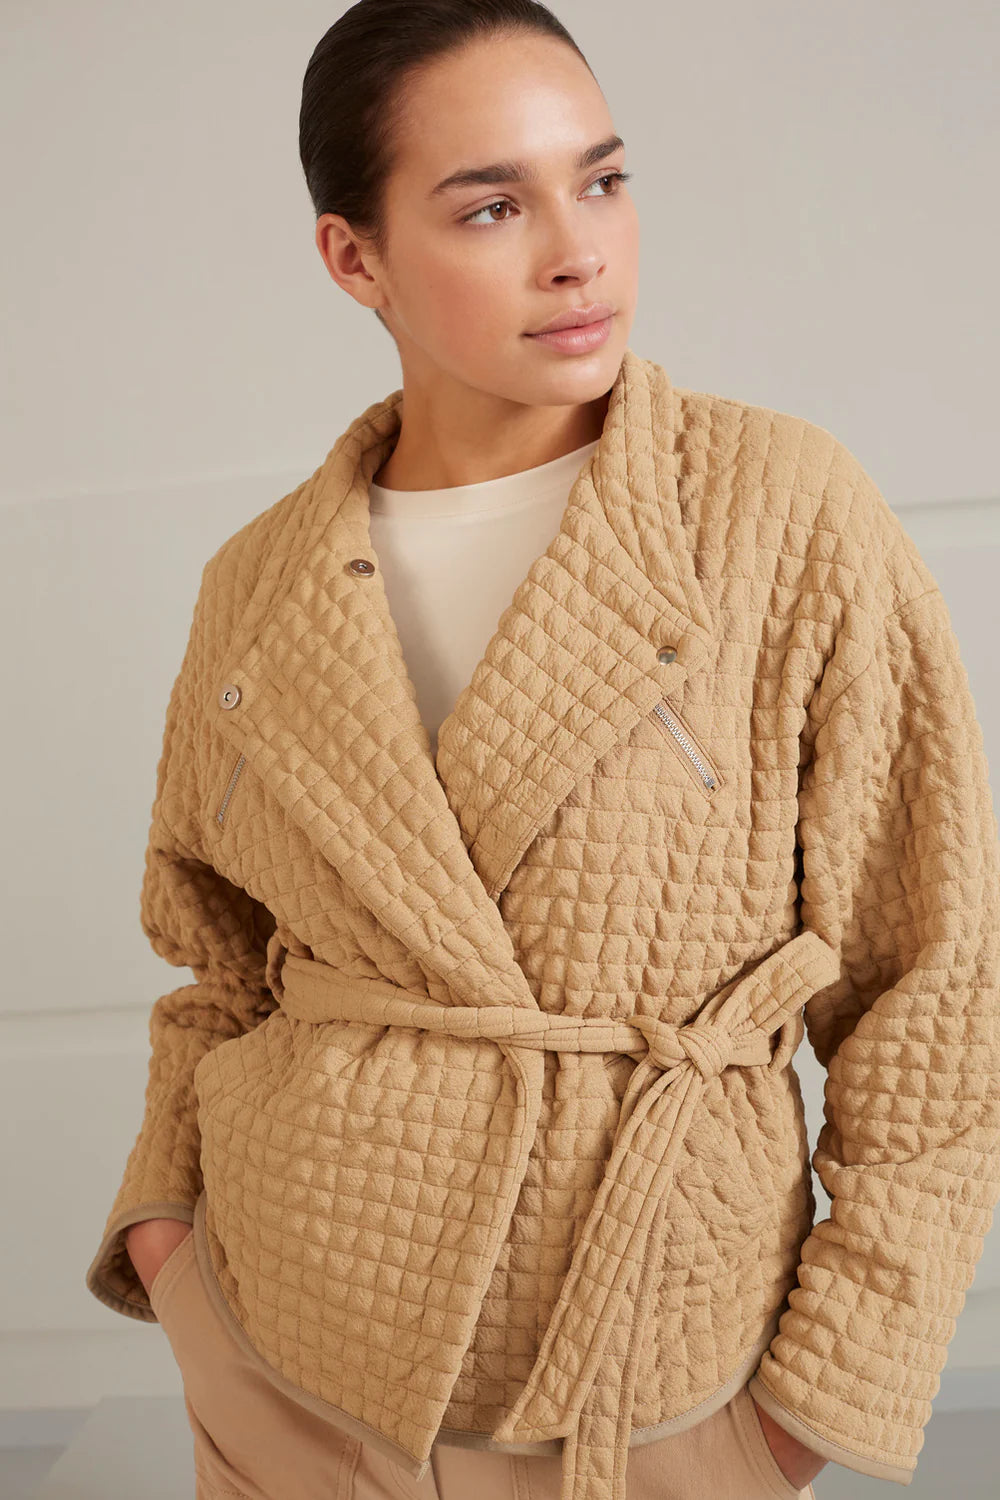 Woven Quilted Jacket